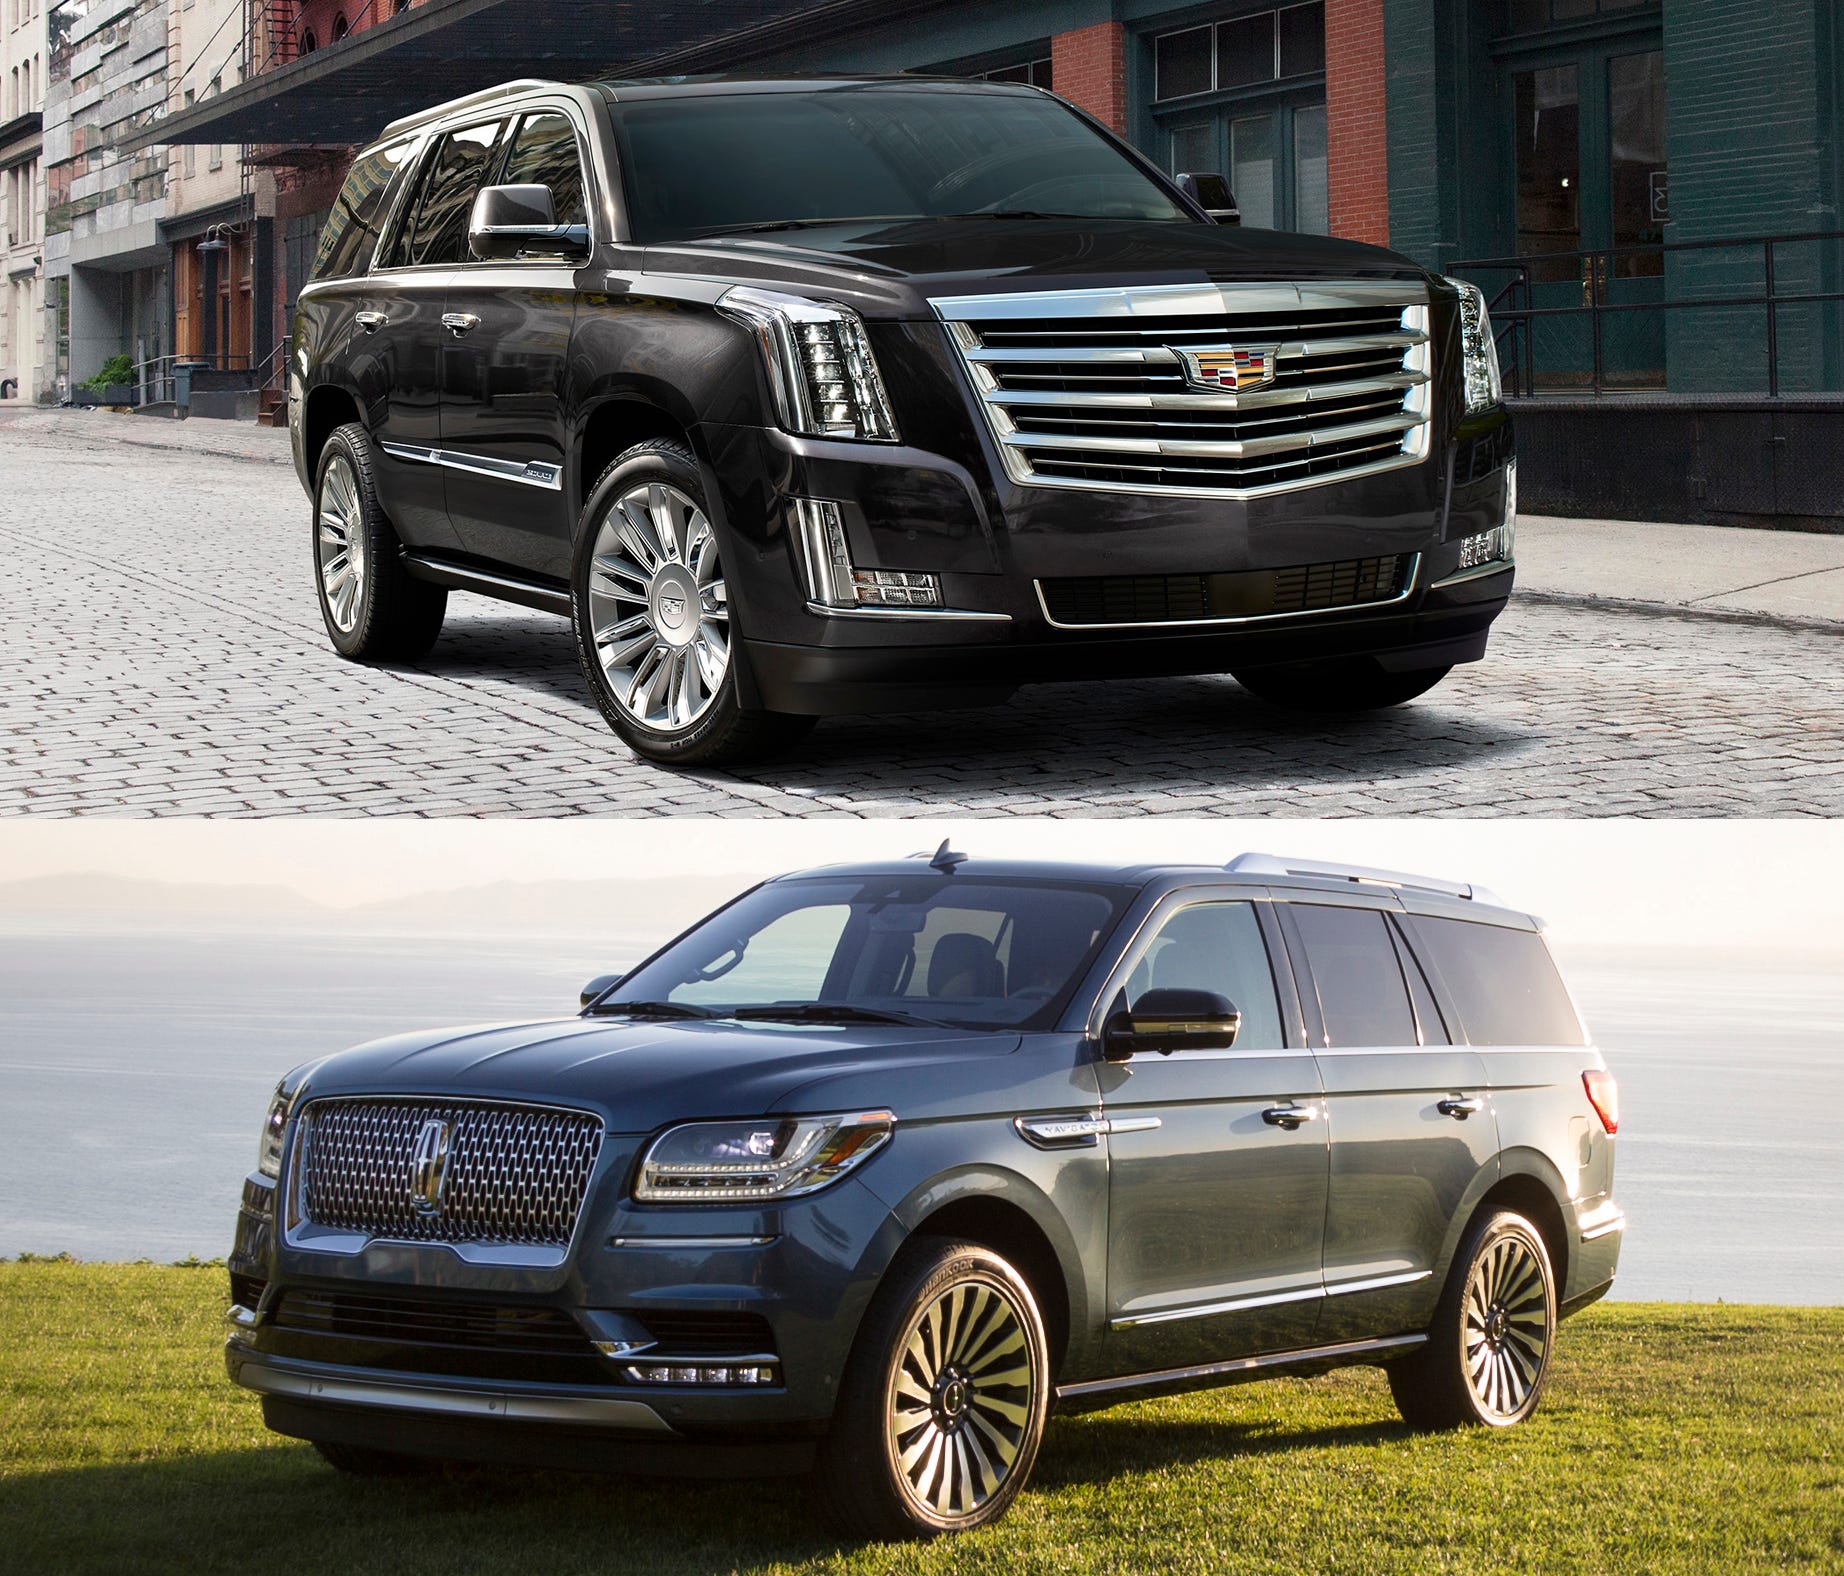 At bottom is the 2018 Lincoln Navigator. At top is the 2018 Cadillac Escalade.